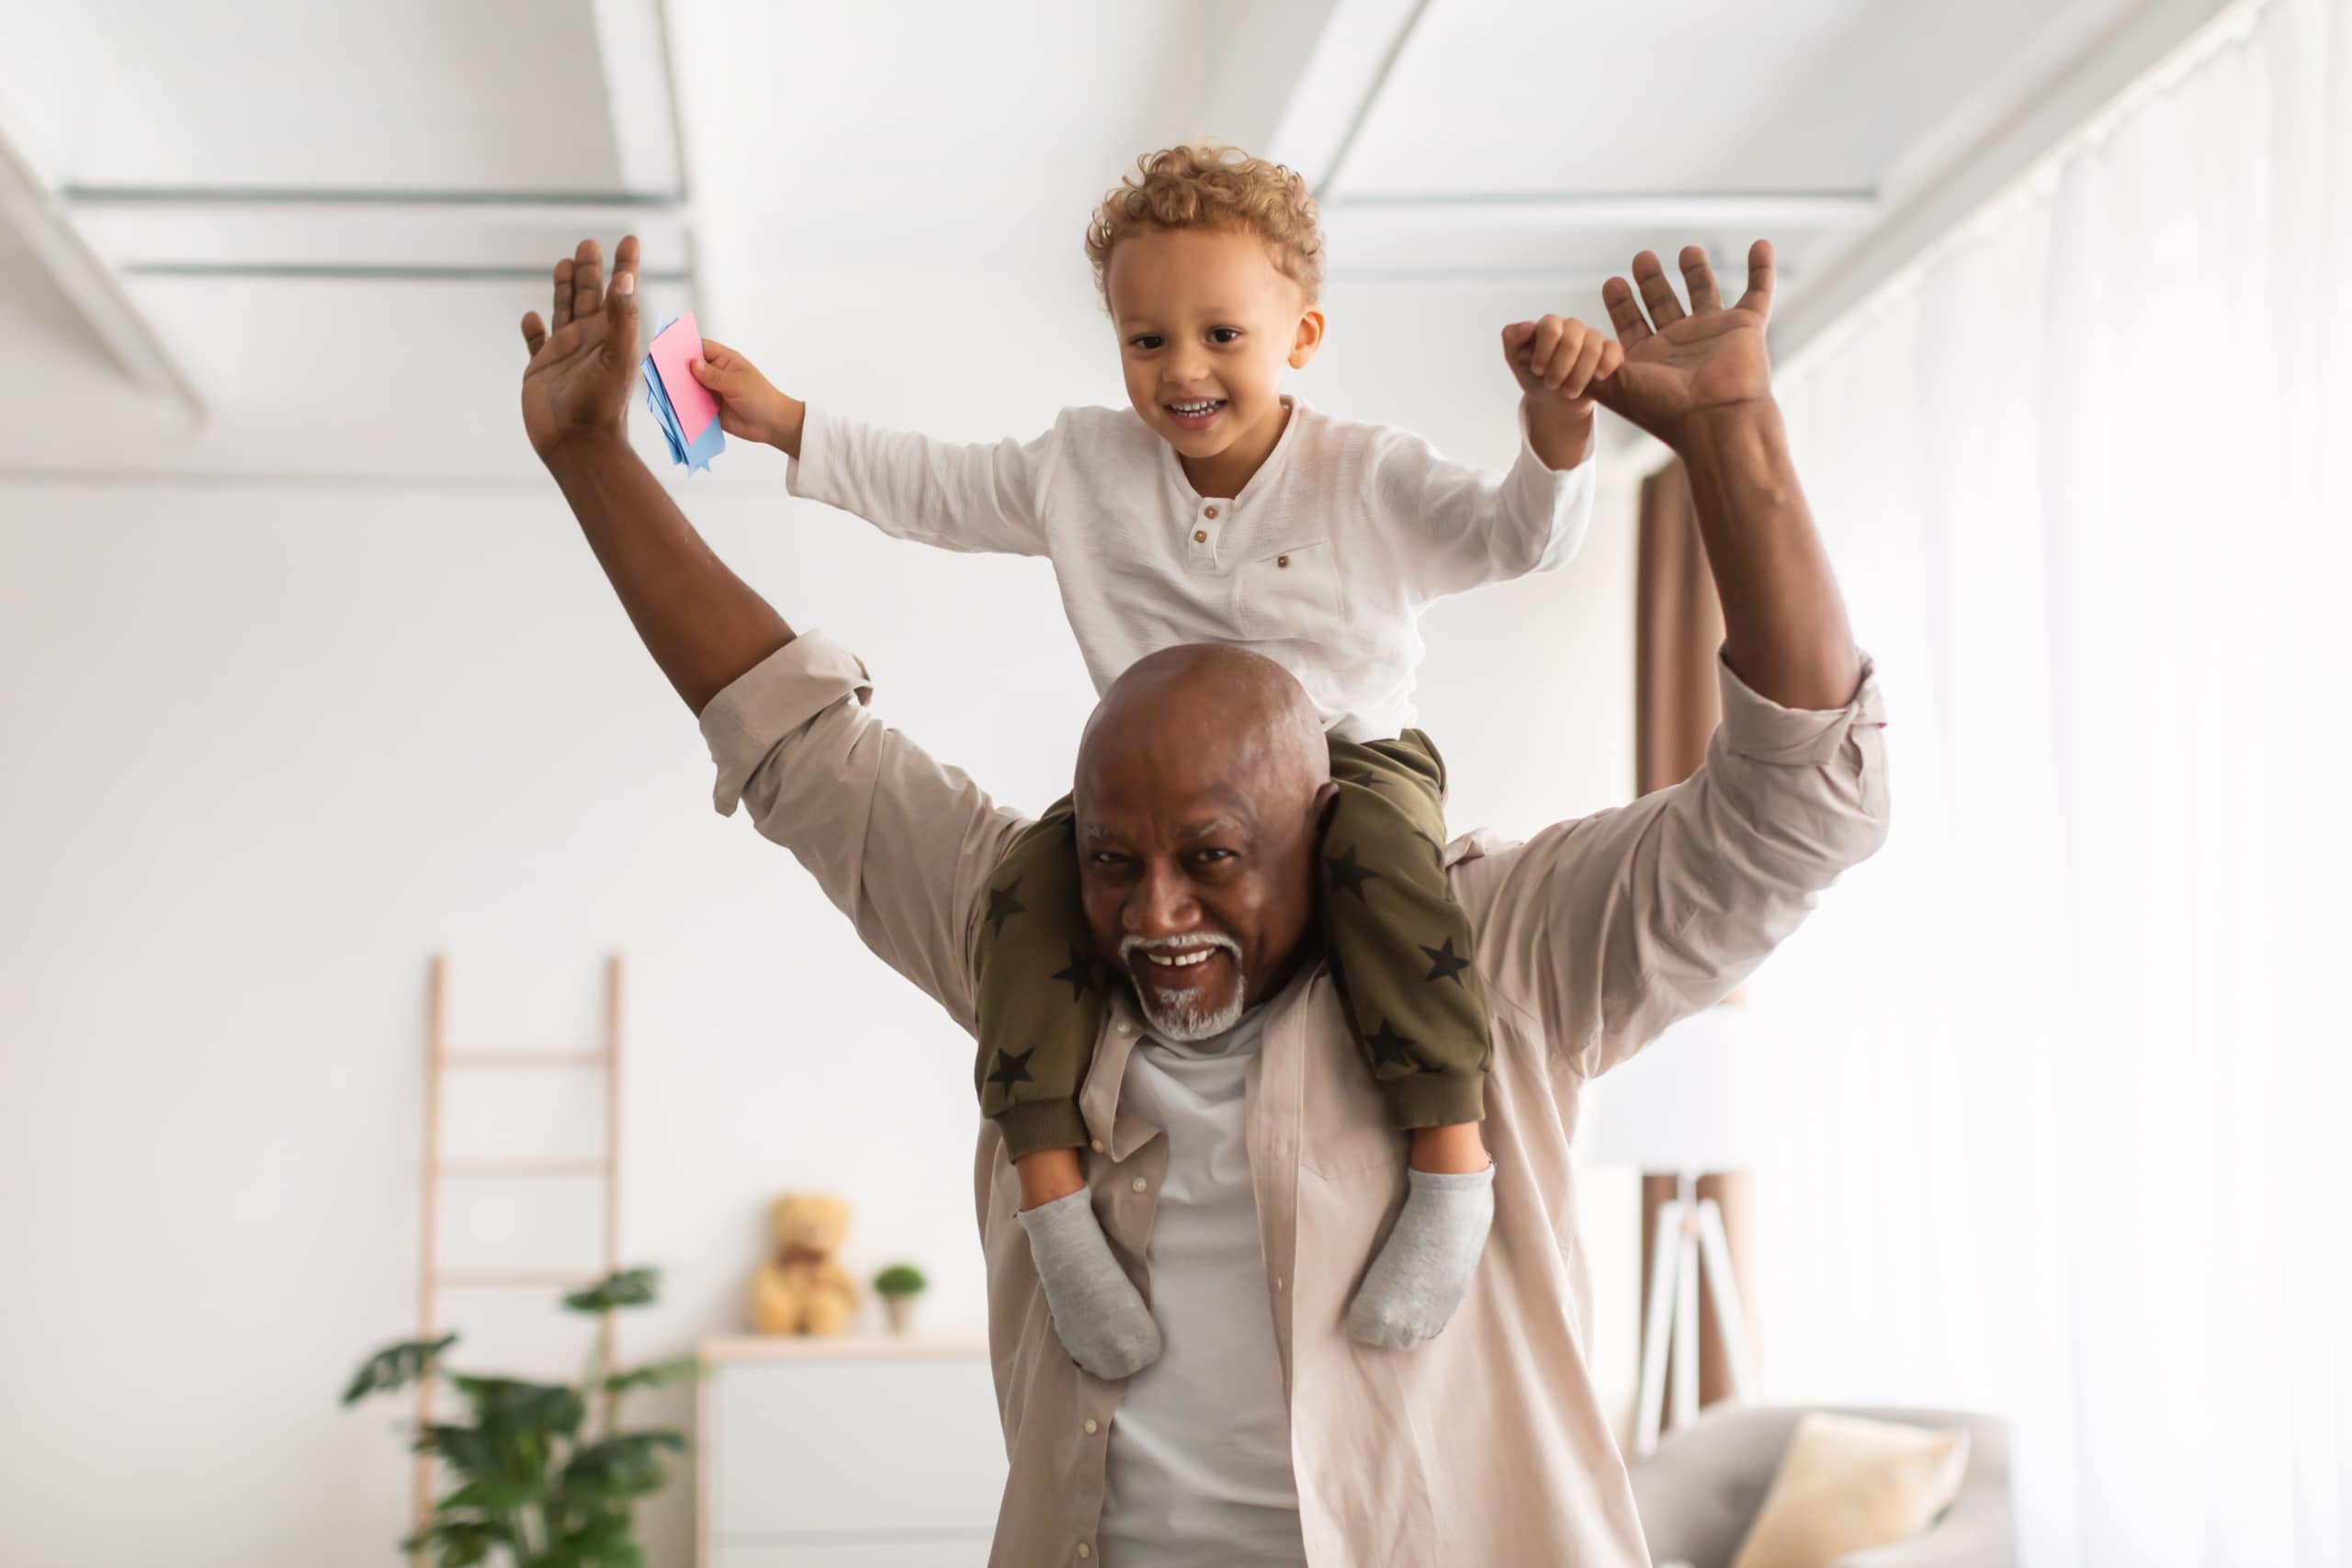 Cheerful African American man carrying his grandson on his shoulders while playing indoors. Federal employees can take advantage of phased retirement to ease the transition from full-time work to leaving the workforce.